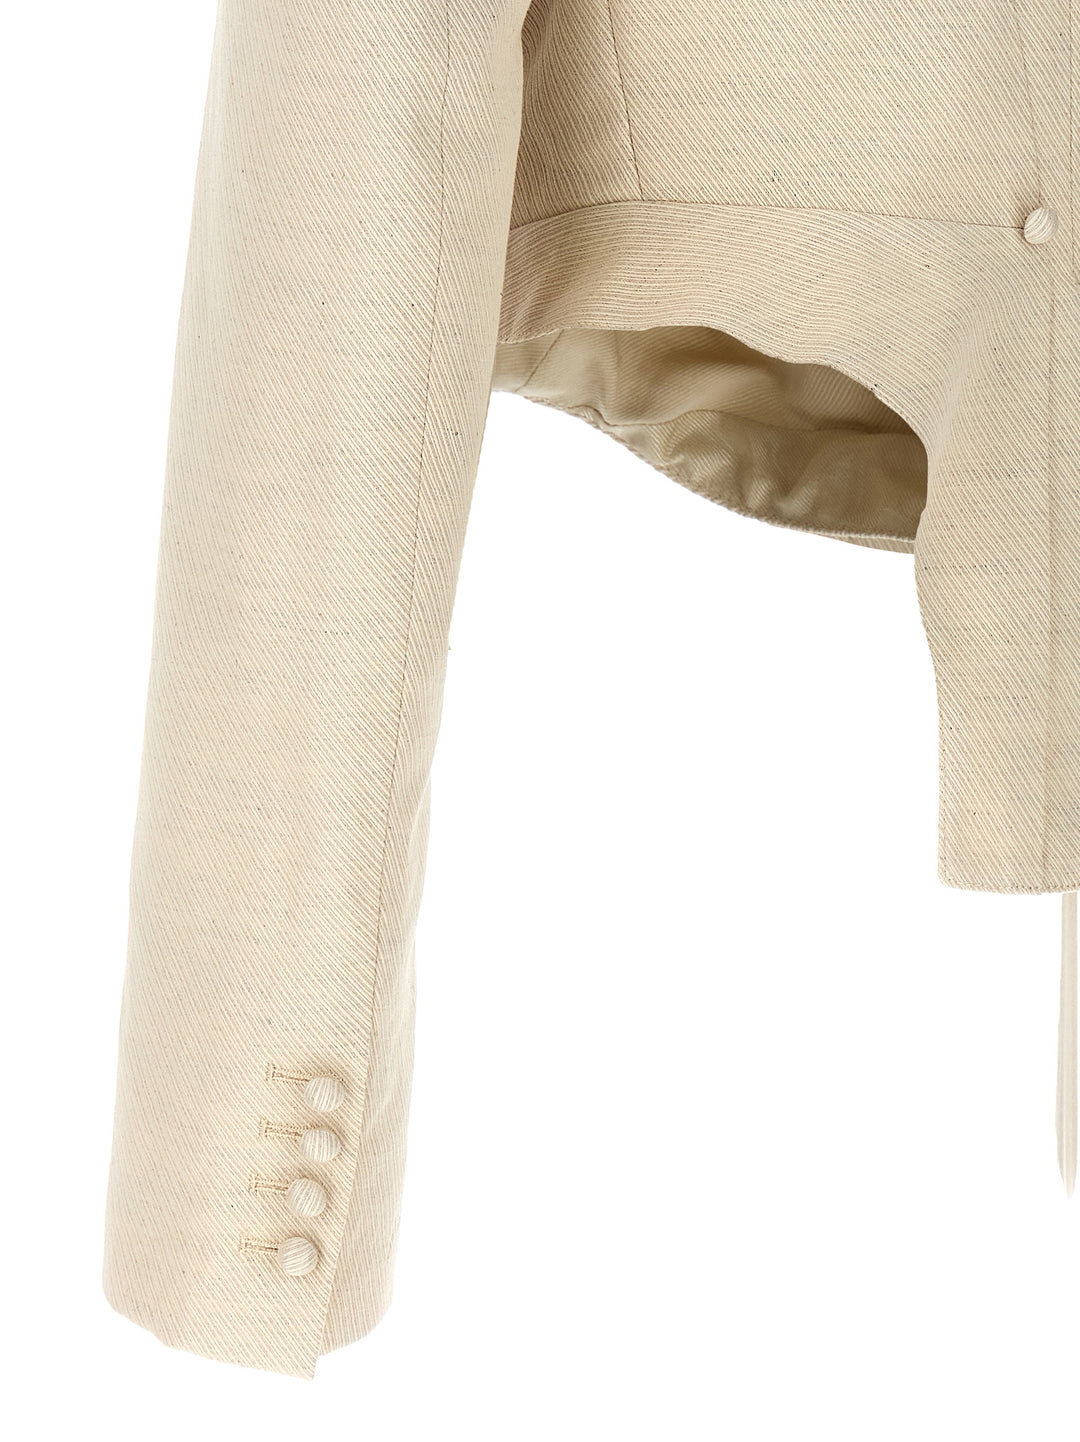 Micro Tail Short Jacket Blazer And Suits Beige